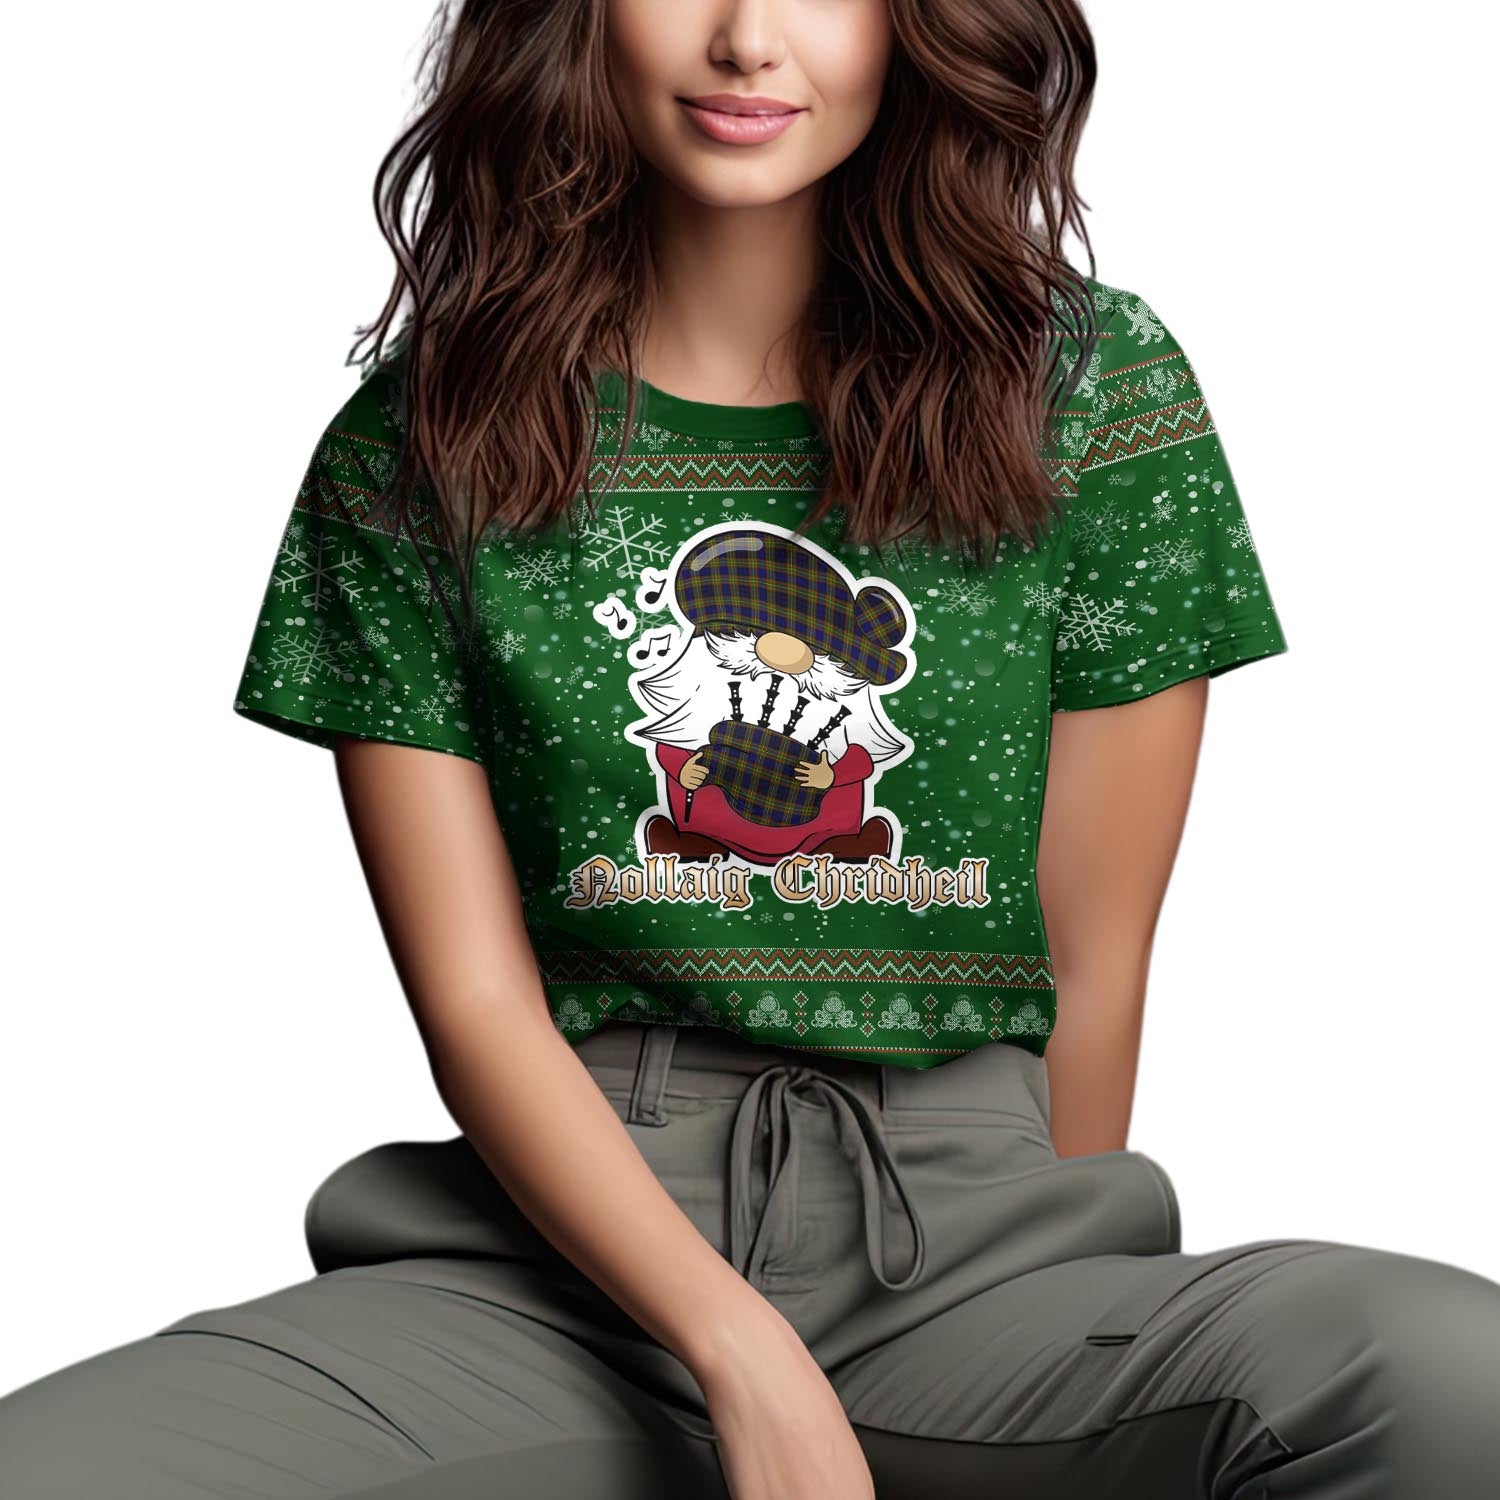 Clelland Modern Clan Christmas Family T-Shirt with Funny Gnome Playing Bagpipes Women's Shirt Green - Tartanvibesclothing